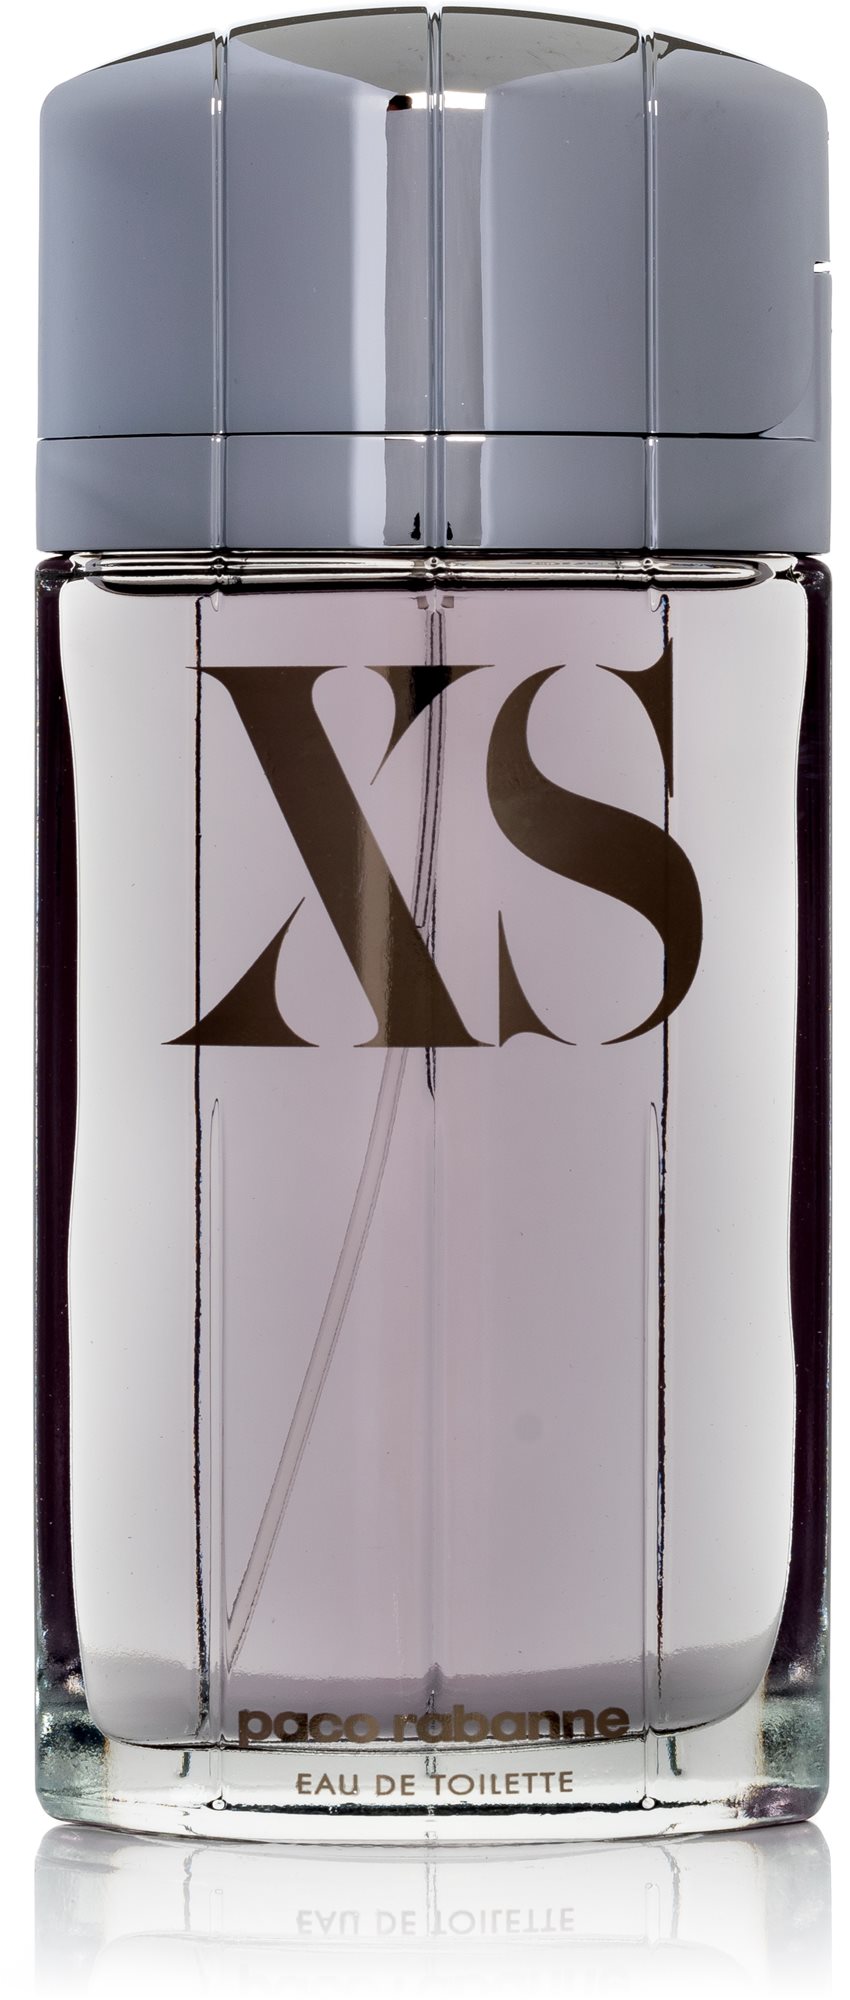 PACO RABANNE XS Pour Homme EdT 100 ml